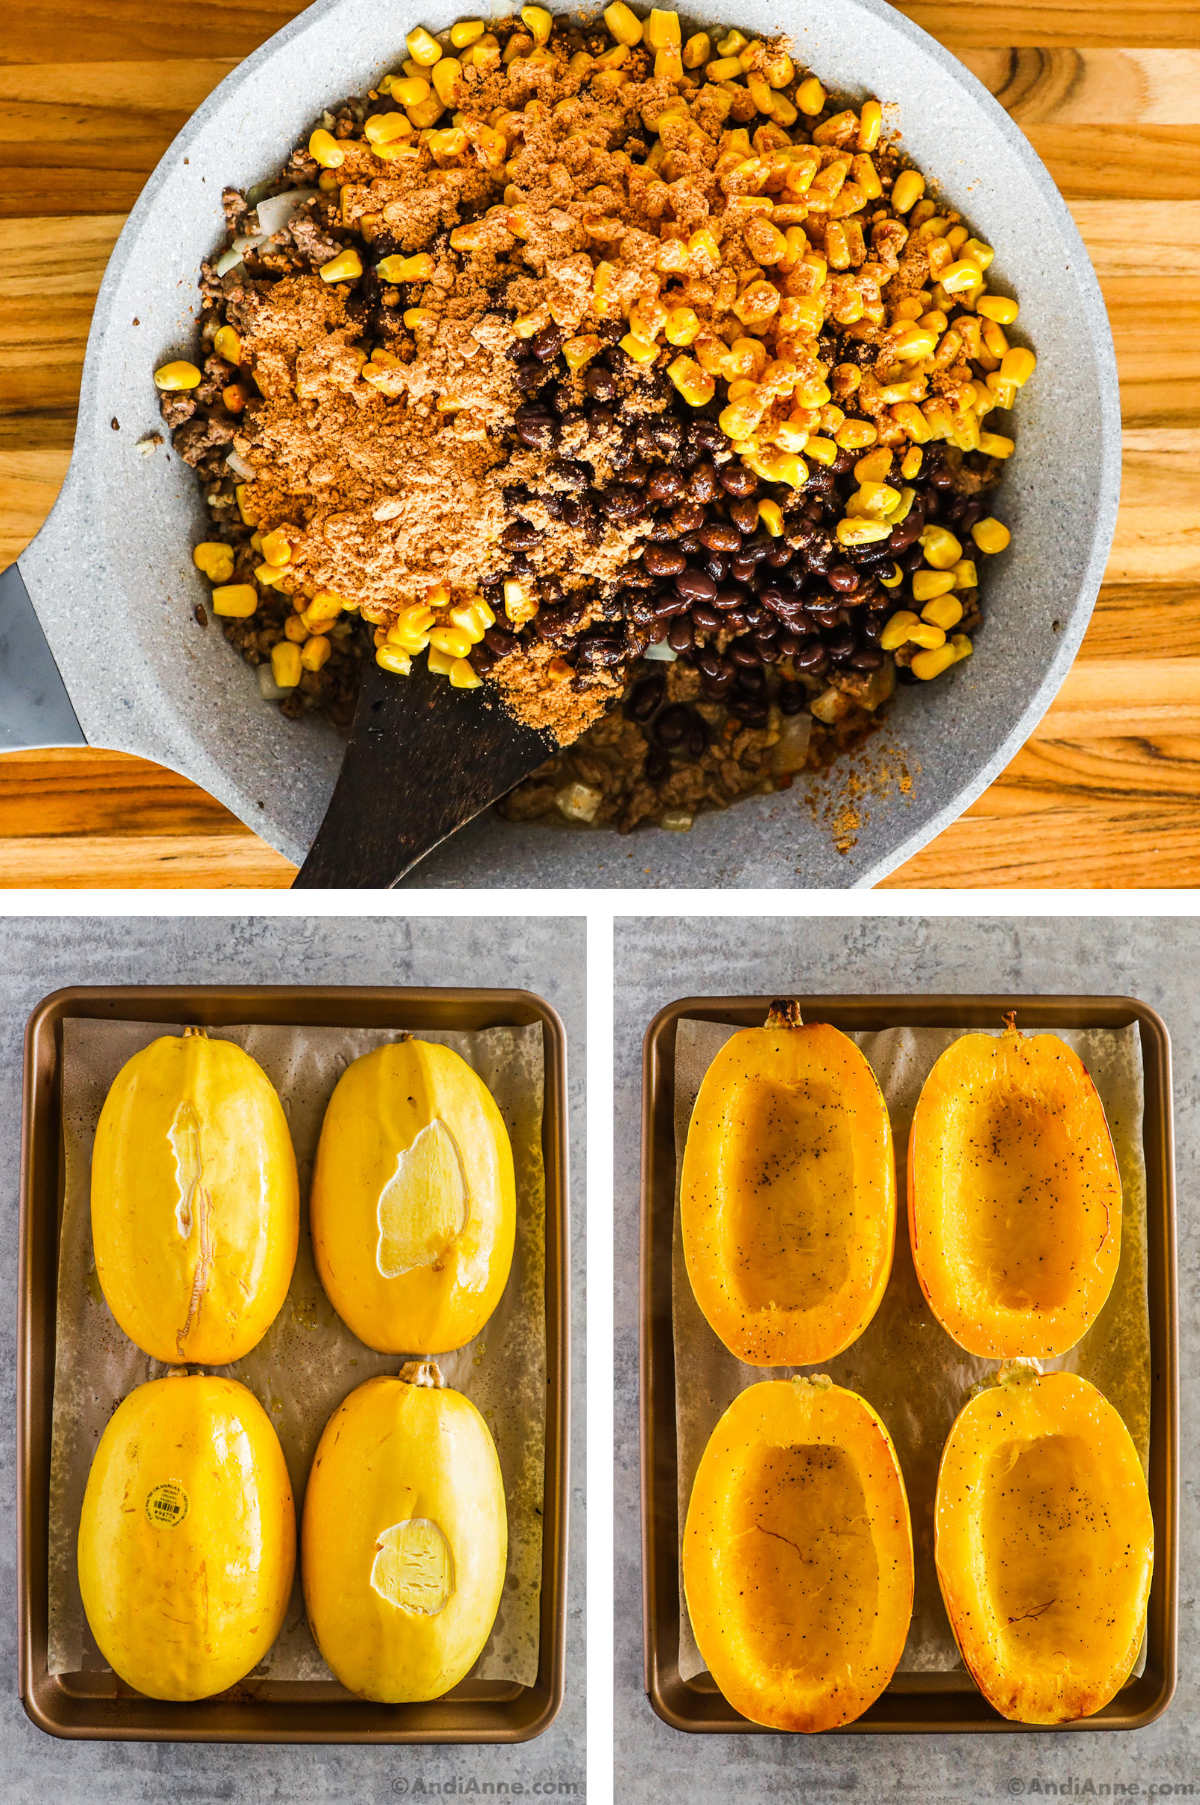 Three overhead images in one: 1. Black beans, corn, taco mix and water are added to the ground beef in a frying pan. 2. Four squash halves are removed from oven, facing down on baking sheet. 3. Four halves have been flipped over to show inside of squash. 